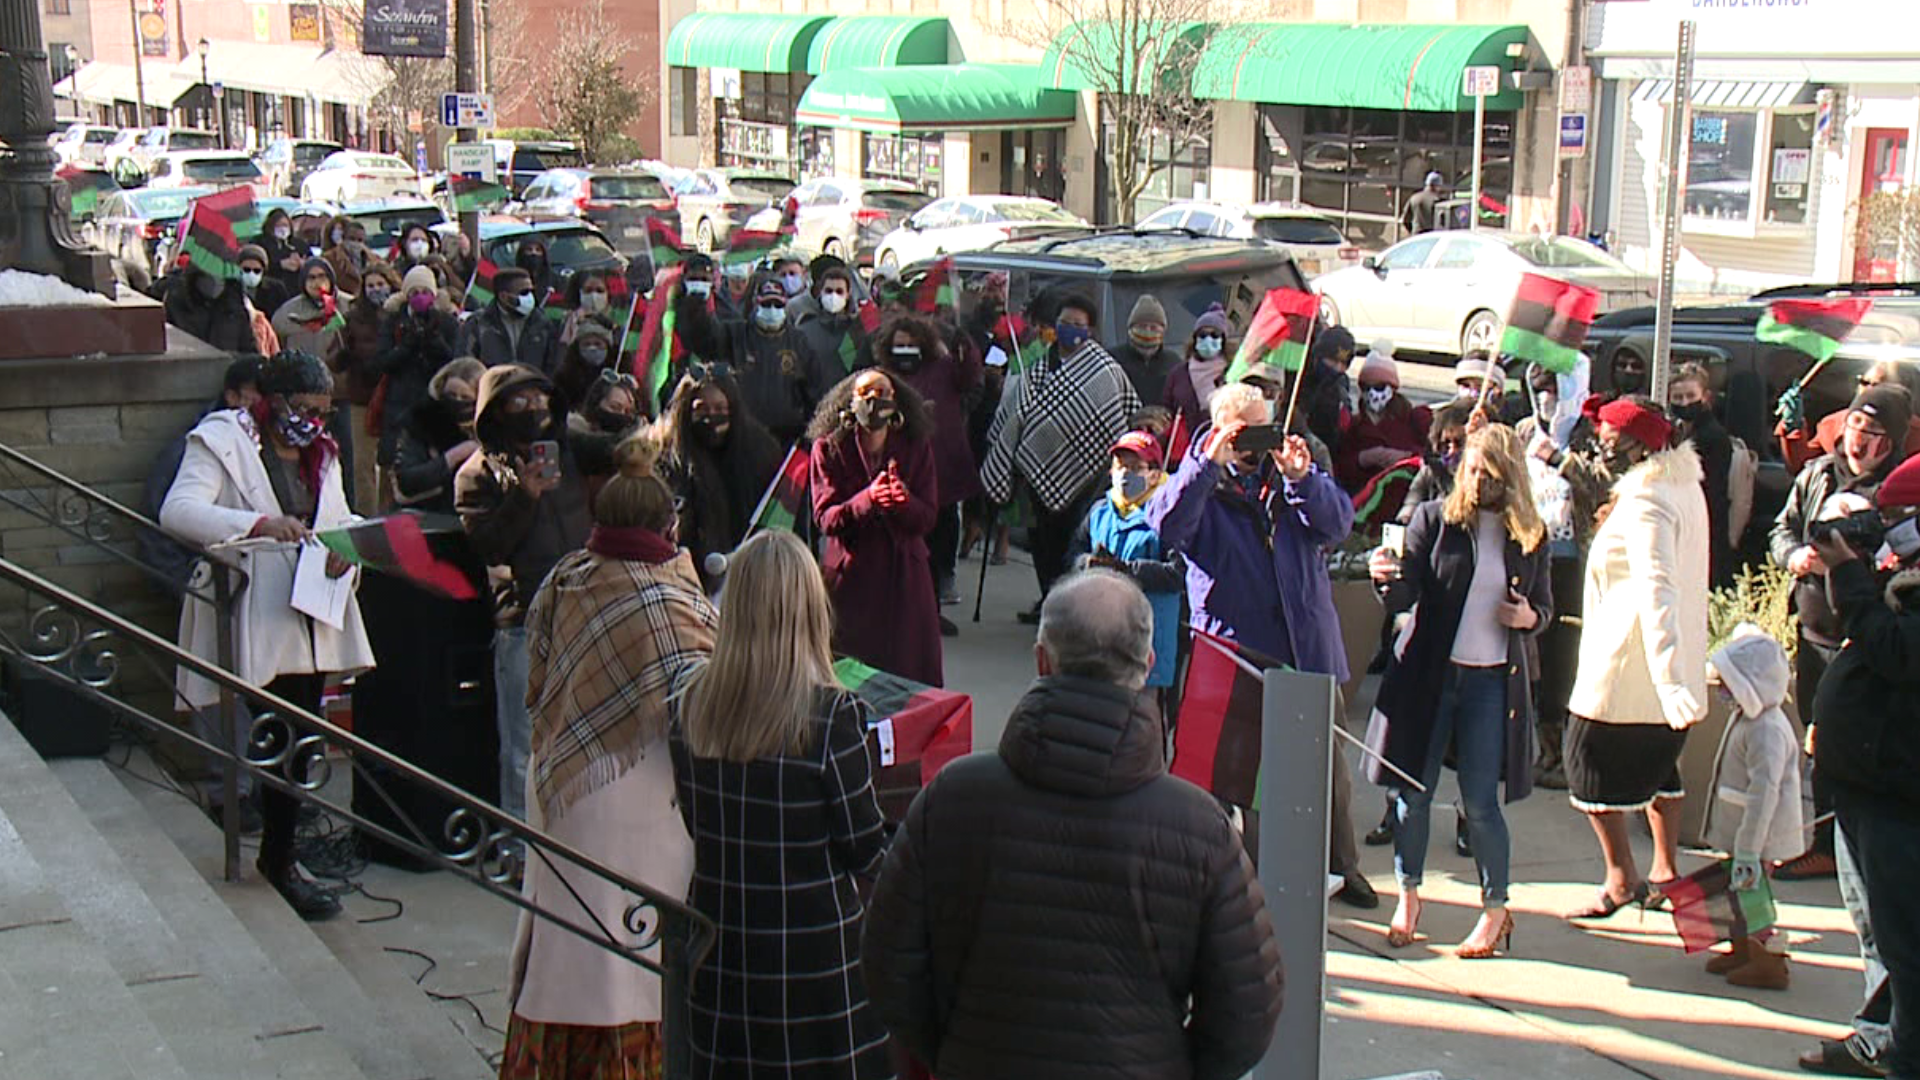 For a second year, a ceremony was held in Scranton to honor Black History Month.